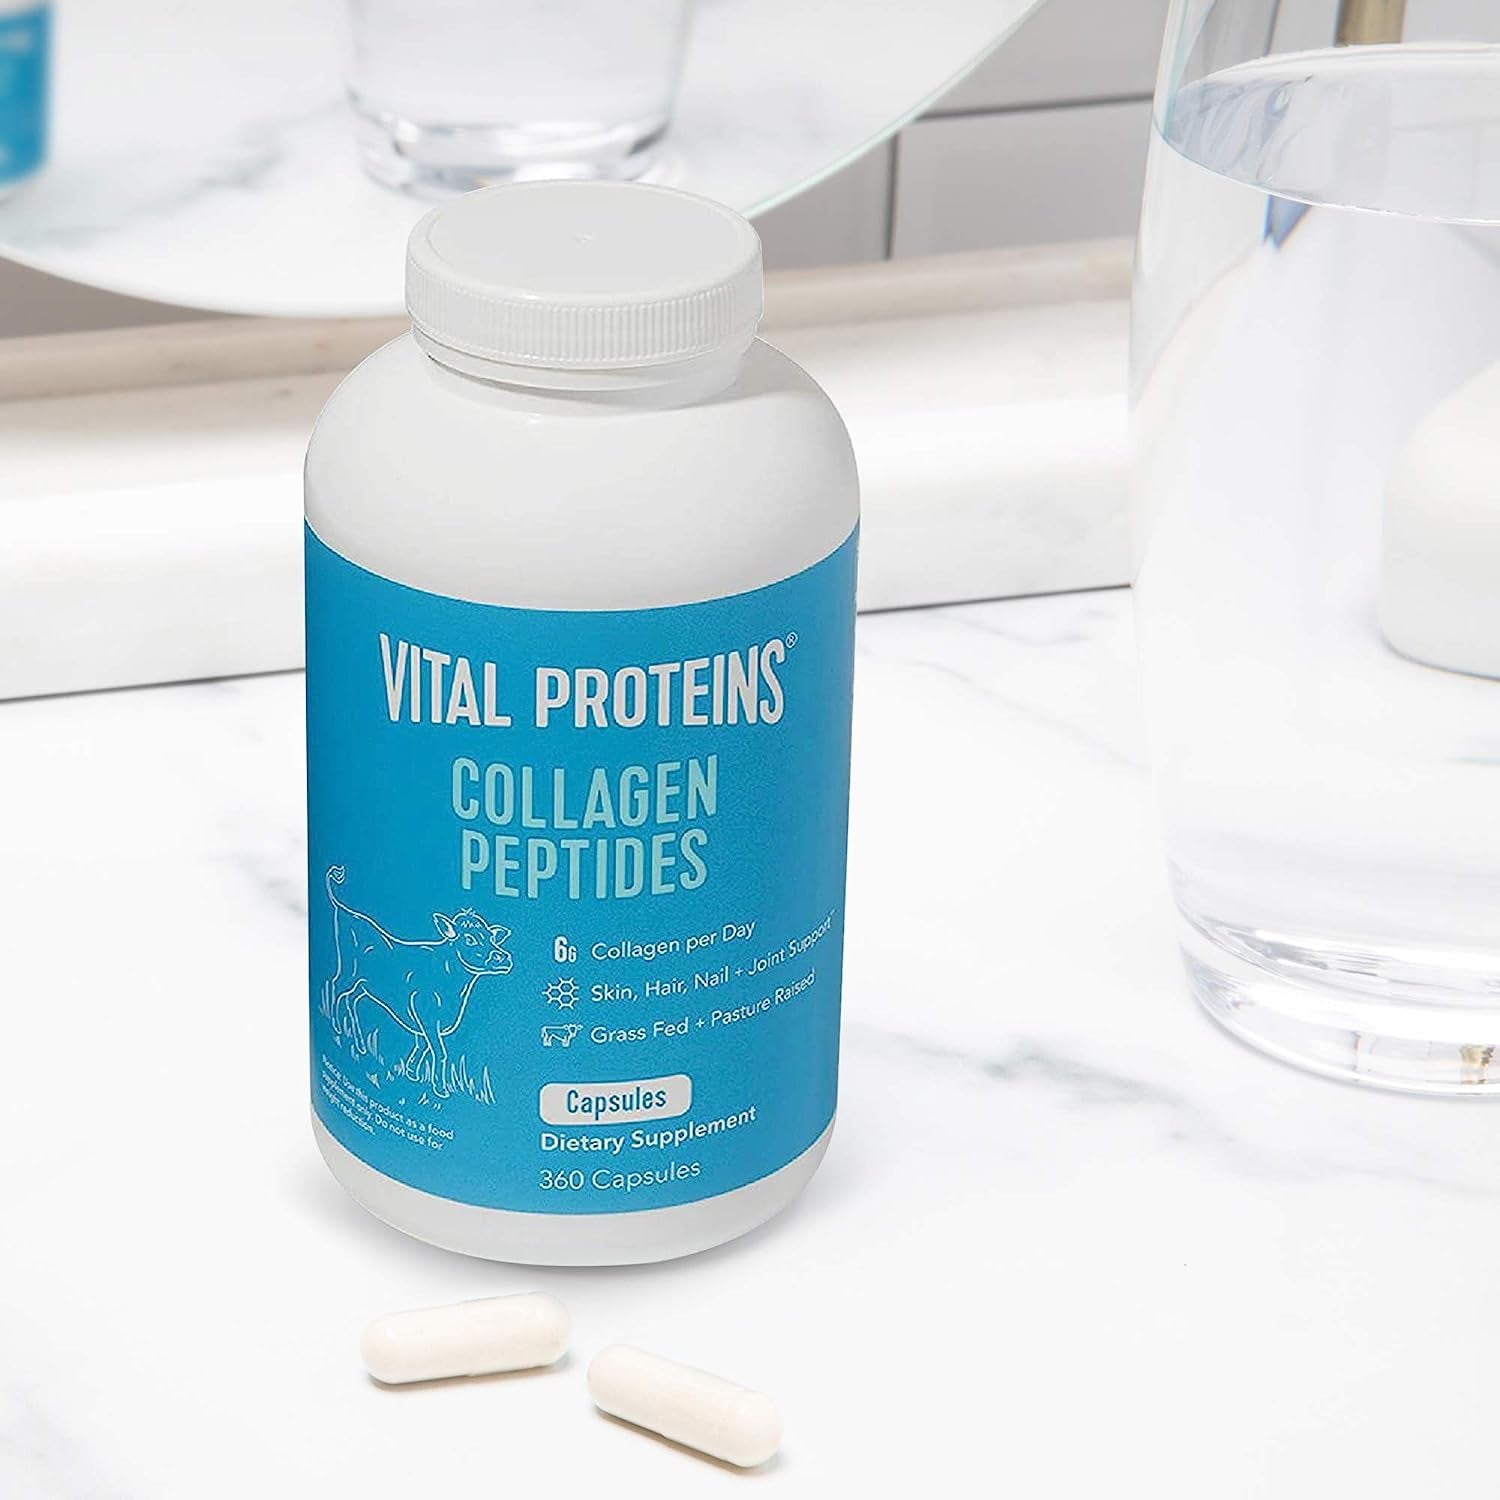 "360 Capsules of Vital Proteins Collagen for Healthy Hair & Skin"